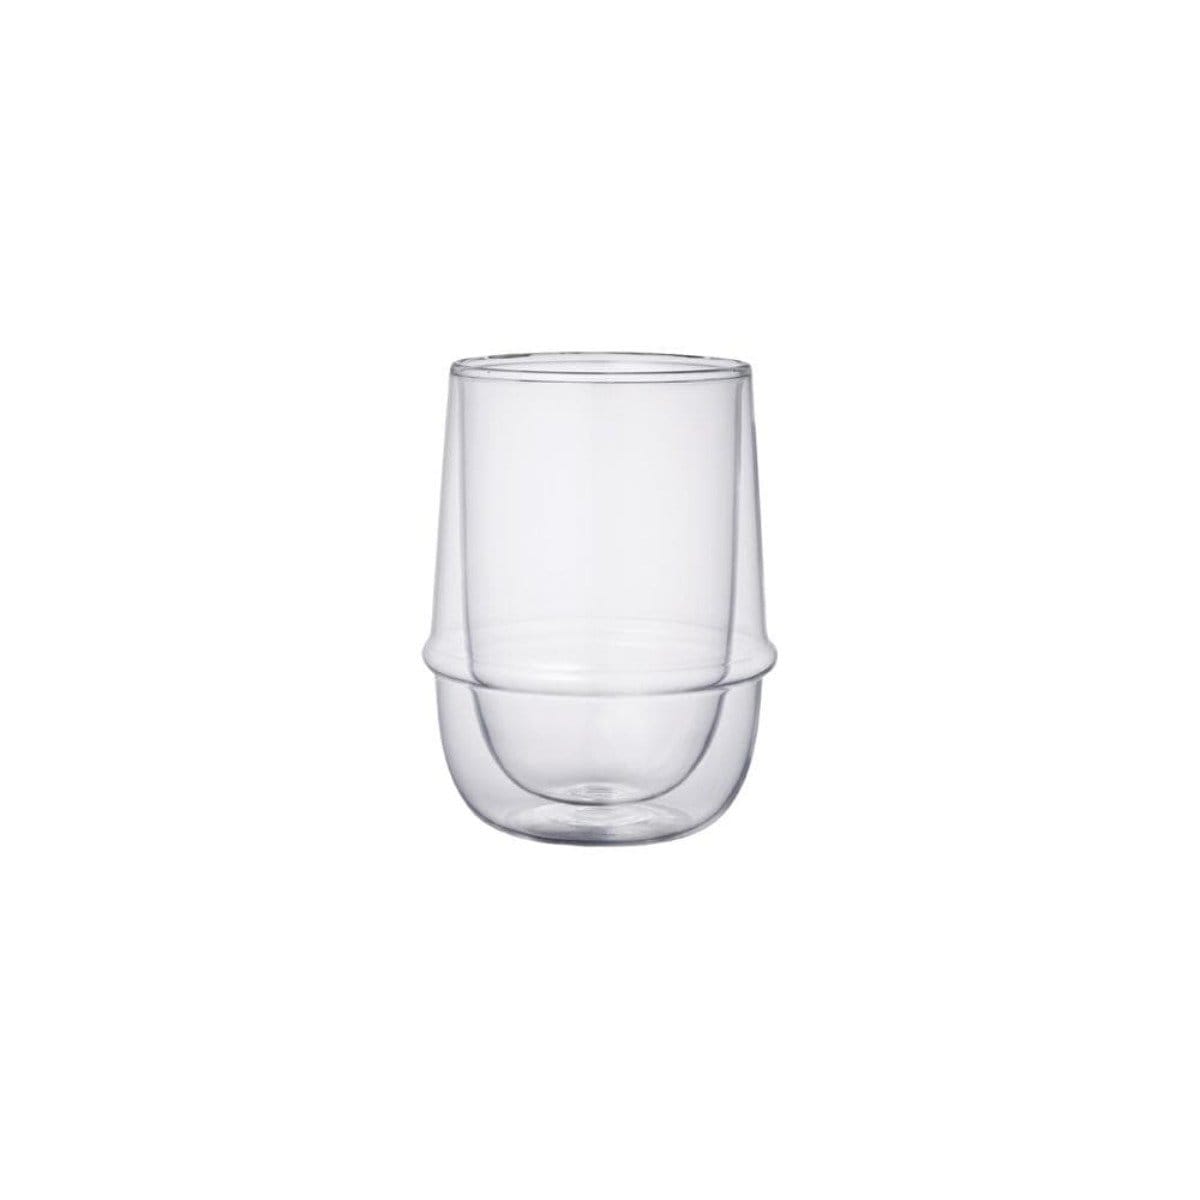 A clear, Kinto Double-Walled Iced Tea Glass: 350mL with a slightly tapered design, featuring a rounded bottom half and a cylindrical top half. Perfect for savoring your favorite Magic Hour tea. The glass is empty and shown against a plain white background.